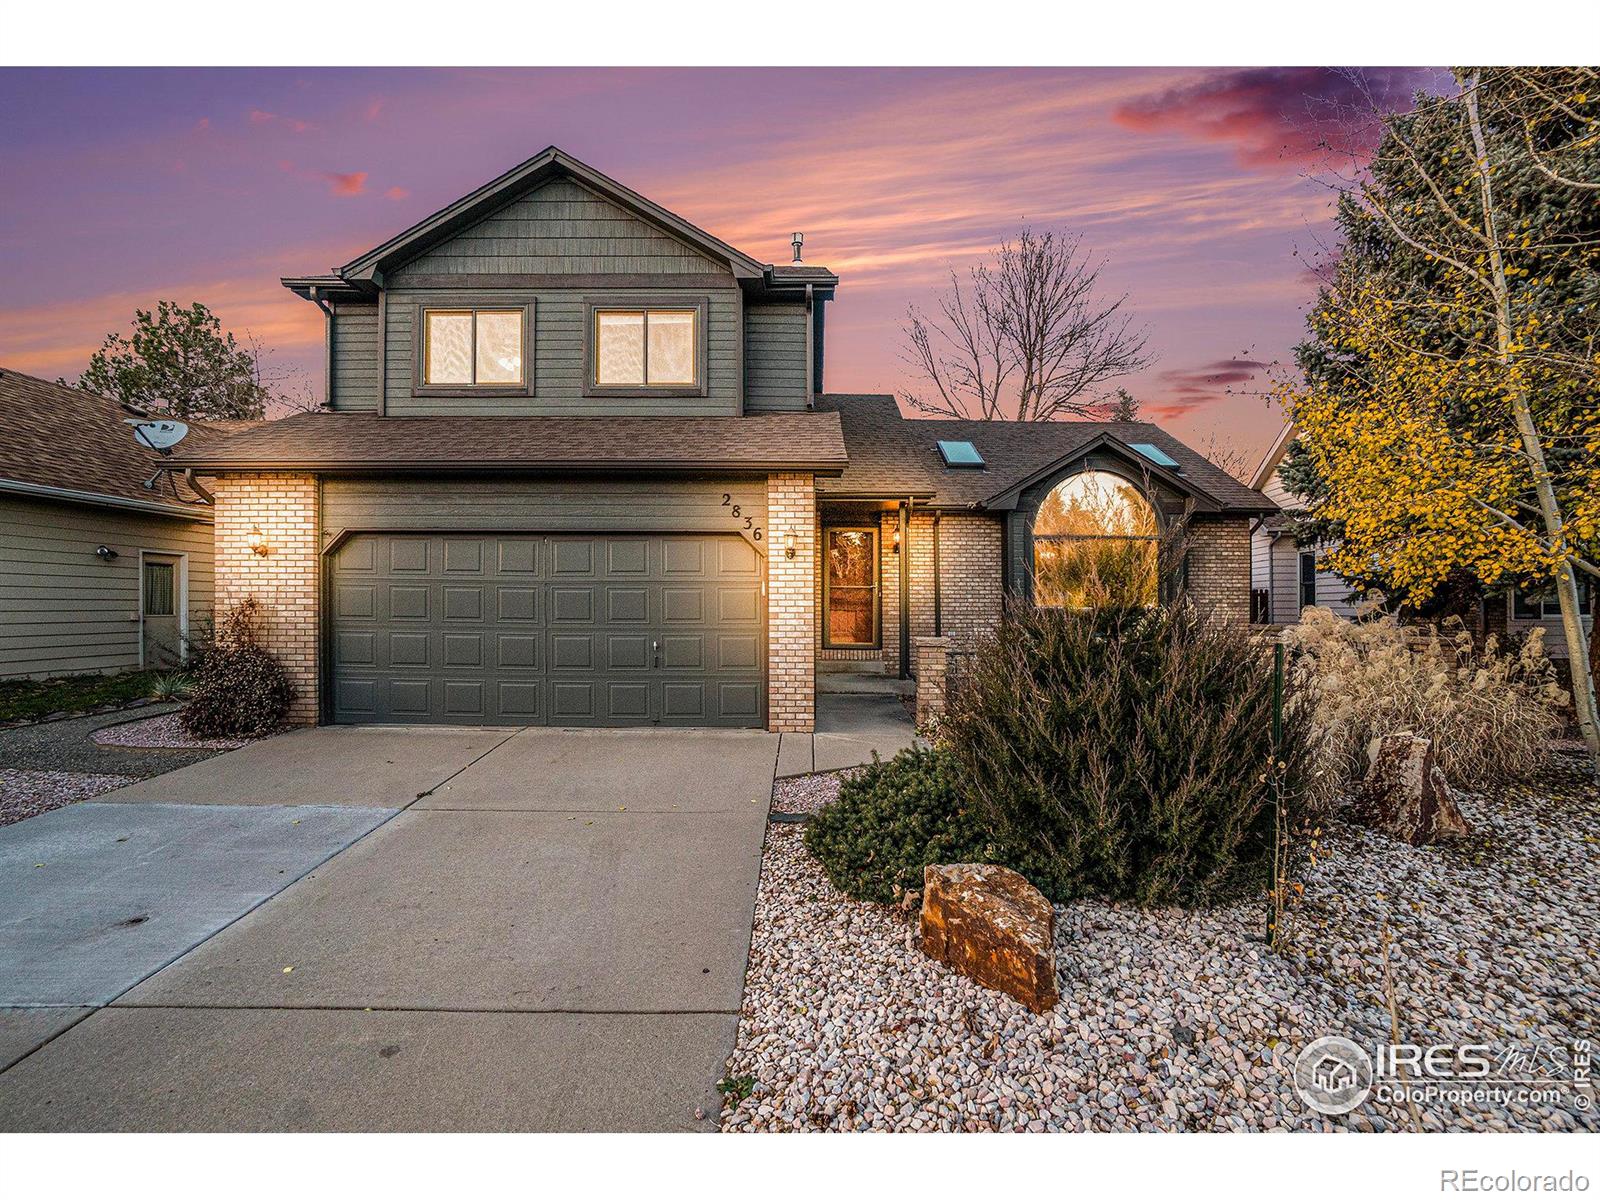 2836  Seccomb Street, fort collins MLS: 456789999397 Beds: 4 Baths: 4 Price: $690,000